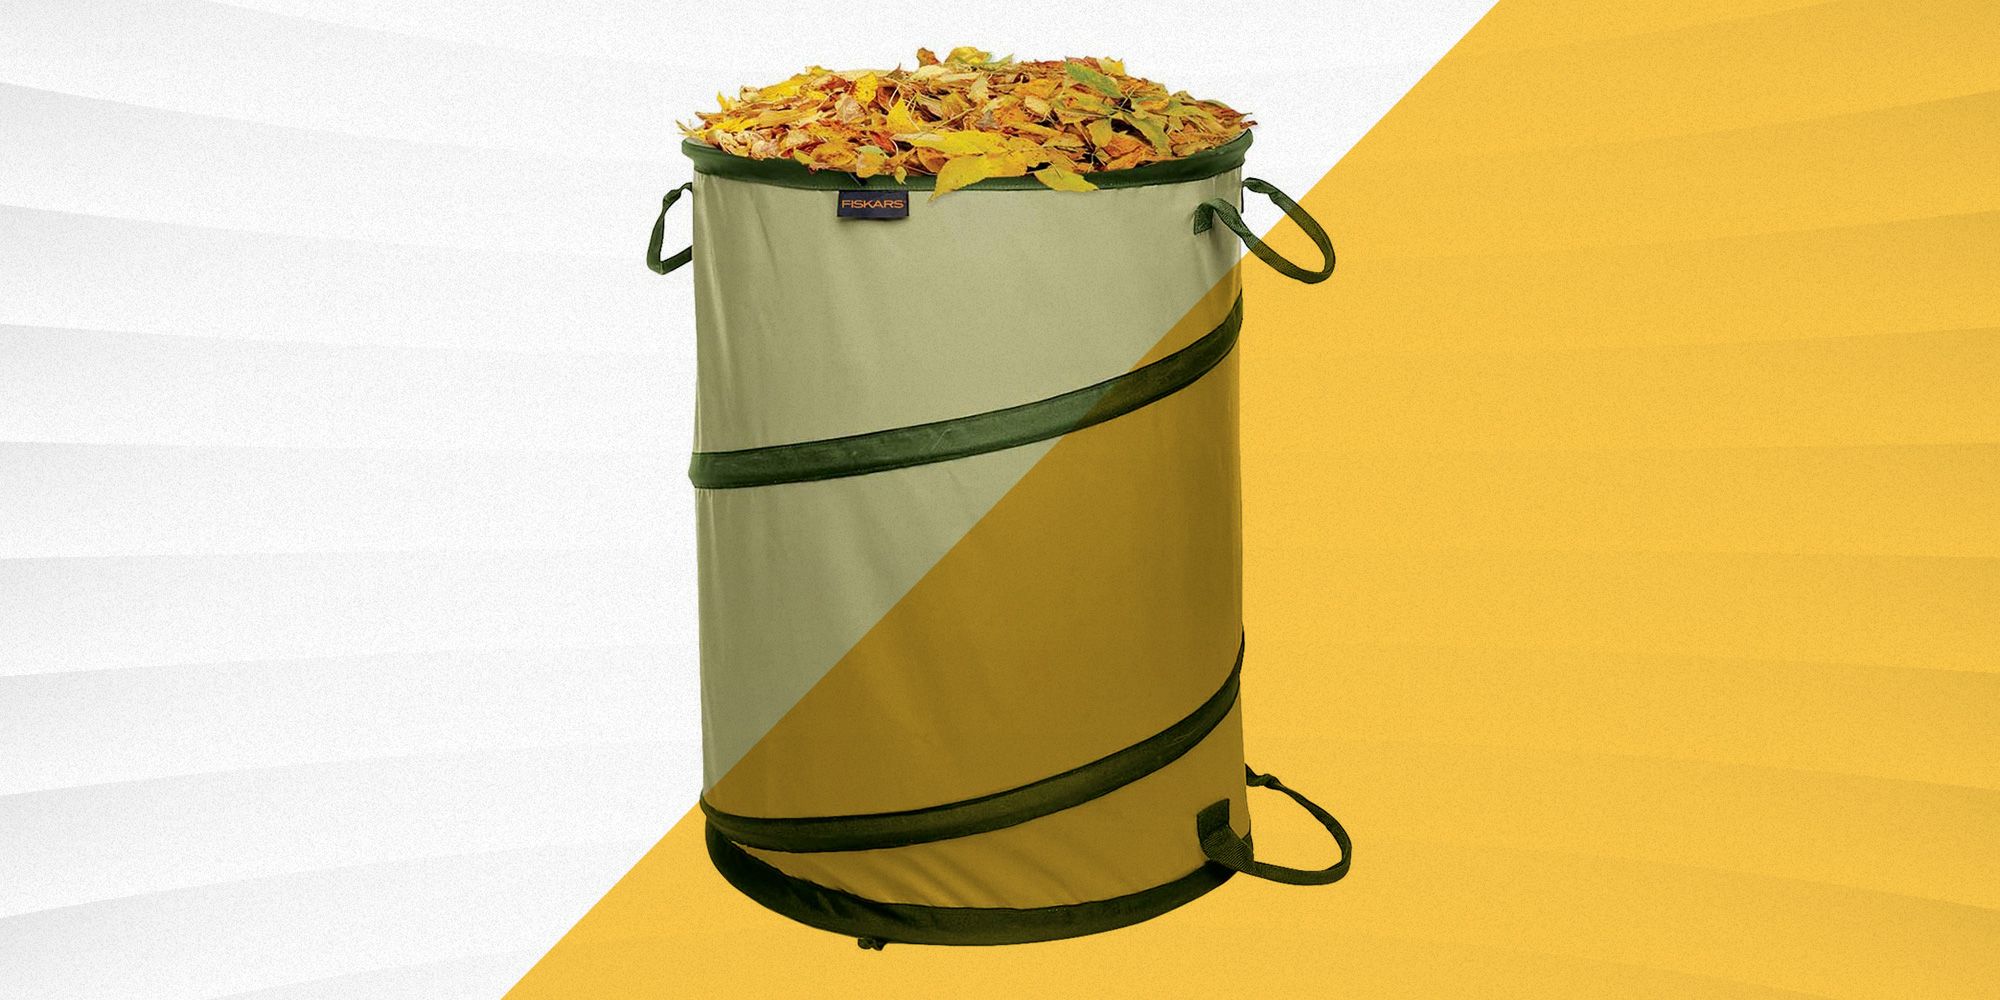 Reusable Yard Waste Bags Garden Garbage Bags Portable Shoulder Strap Washable Non-Woven Fabric Green Lawn and Leaf Waste Bag Luckly Pop Up Collapsible Garden Storage Bag 